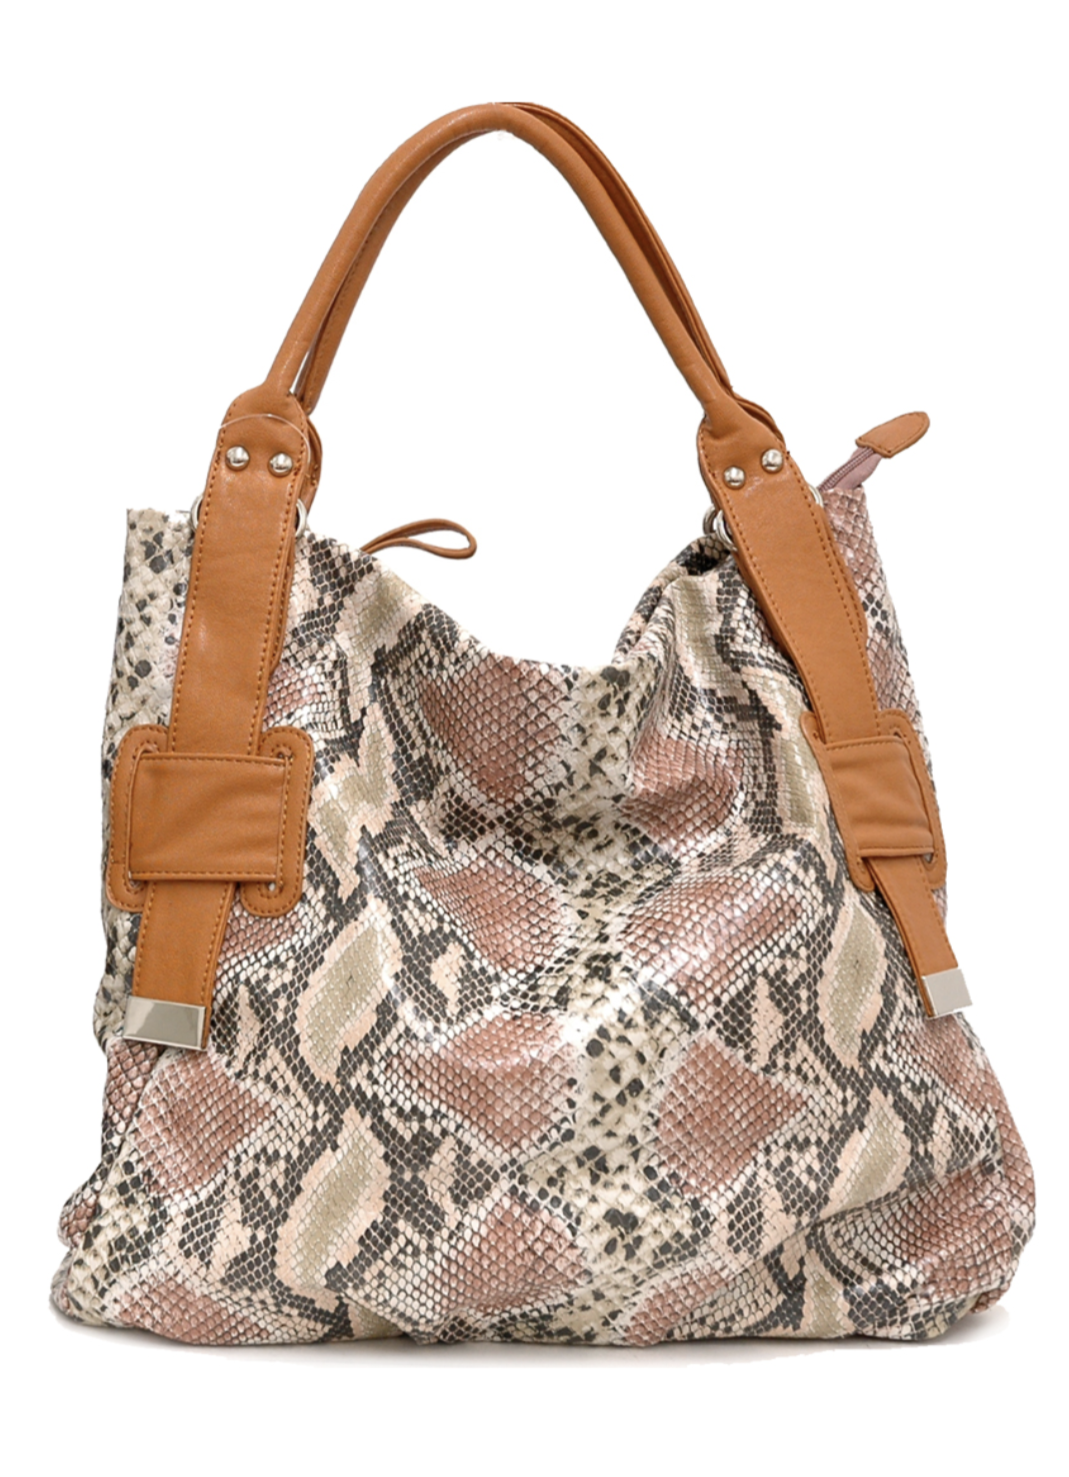 Two-Tone Faux Python Leather Tote Bag